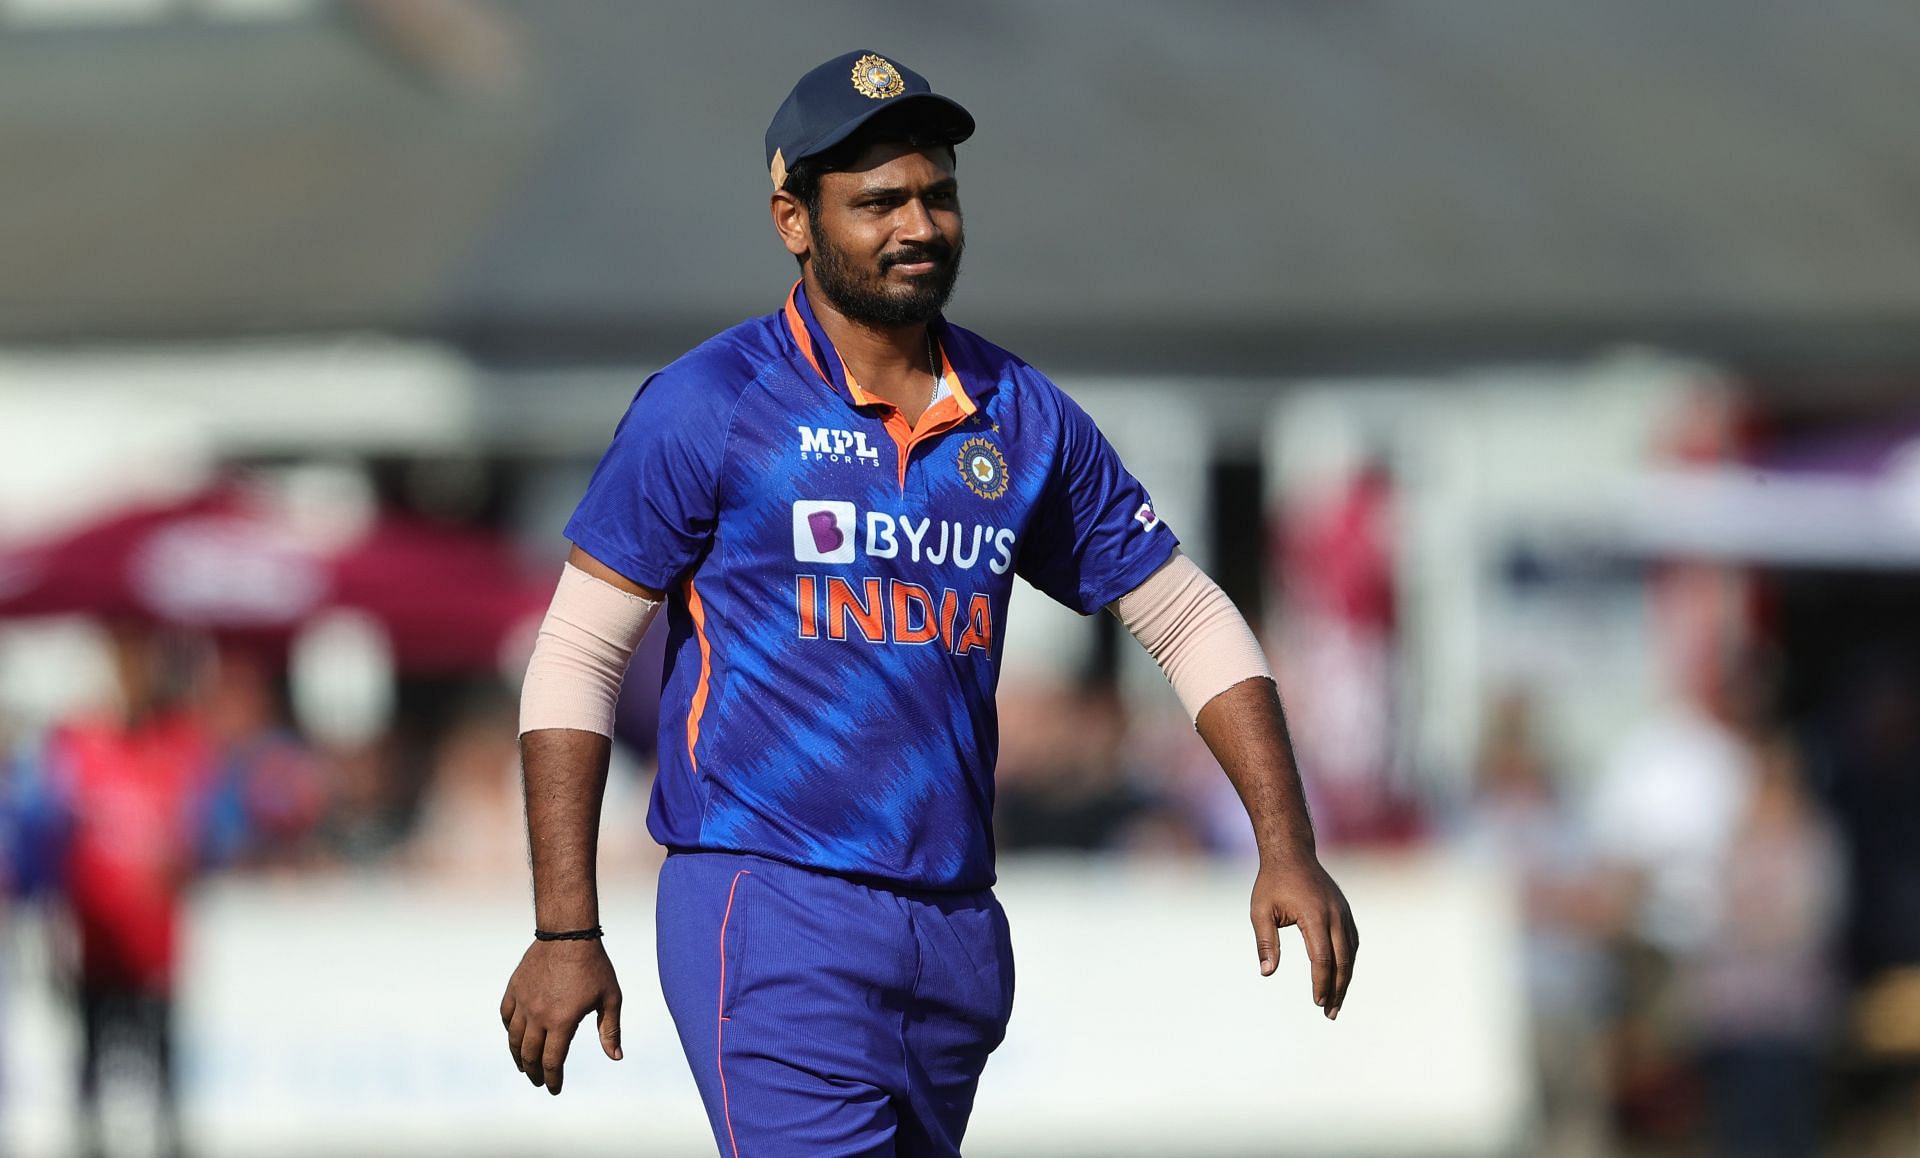 Could Sanju Samson be dropped for Jitesh Sharma to get a chance?